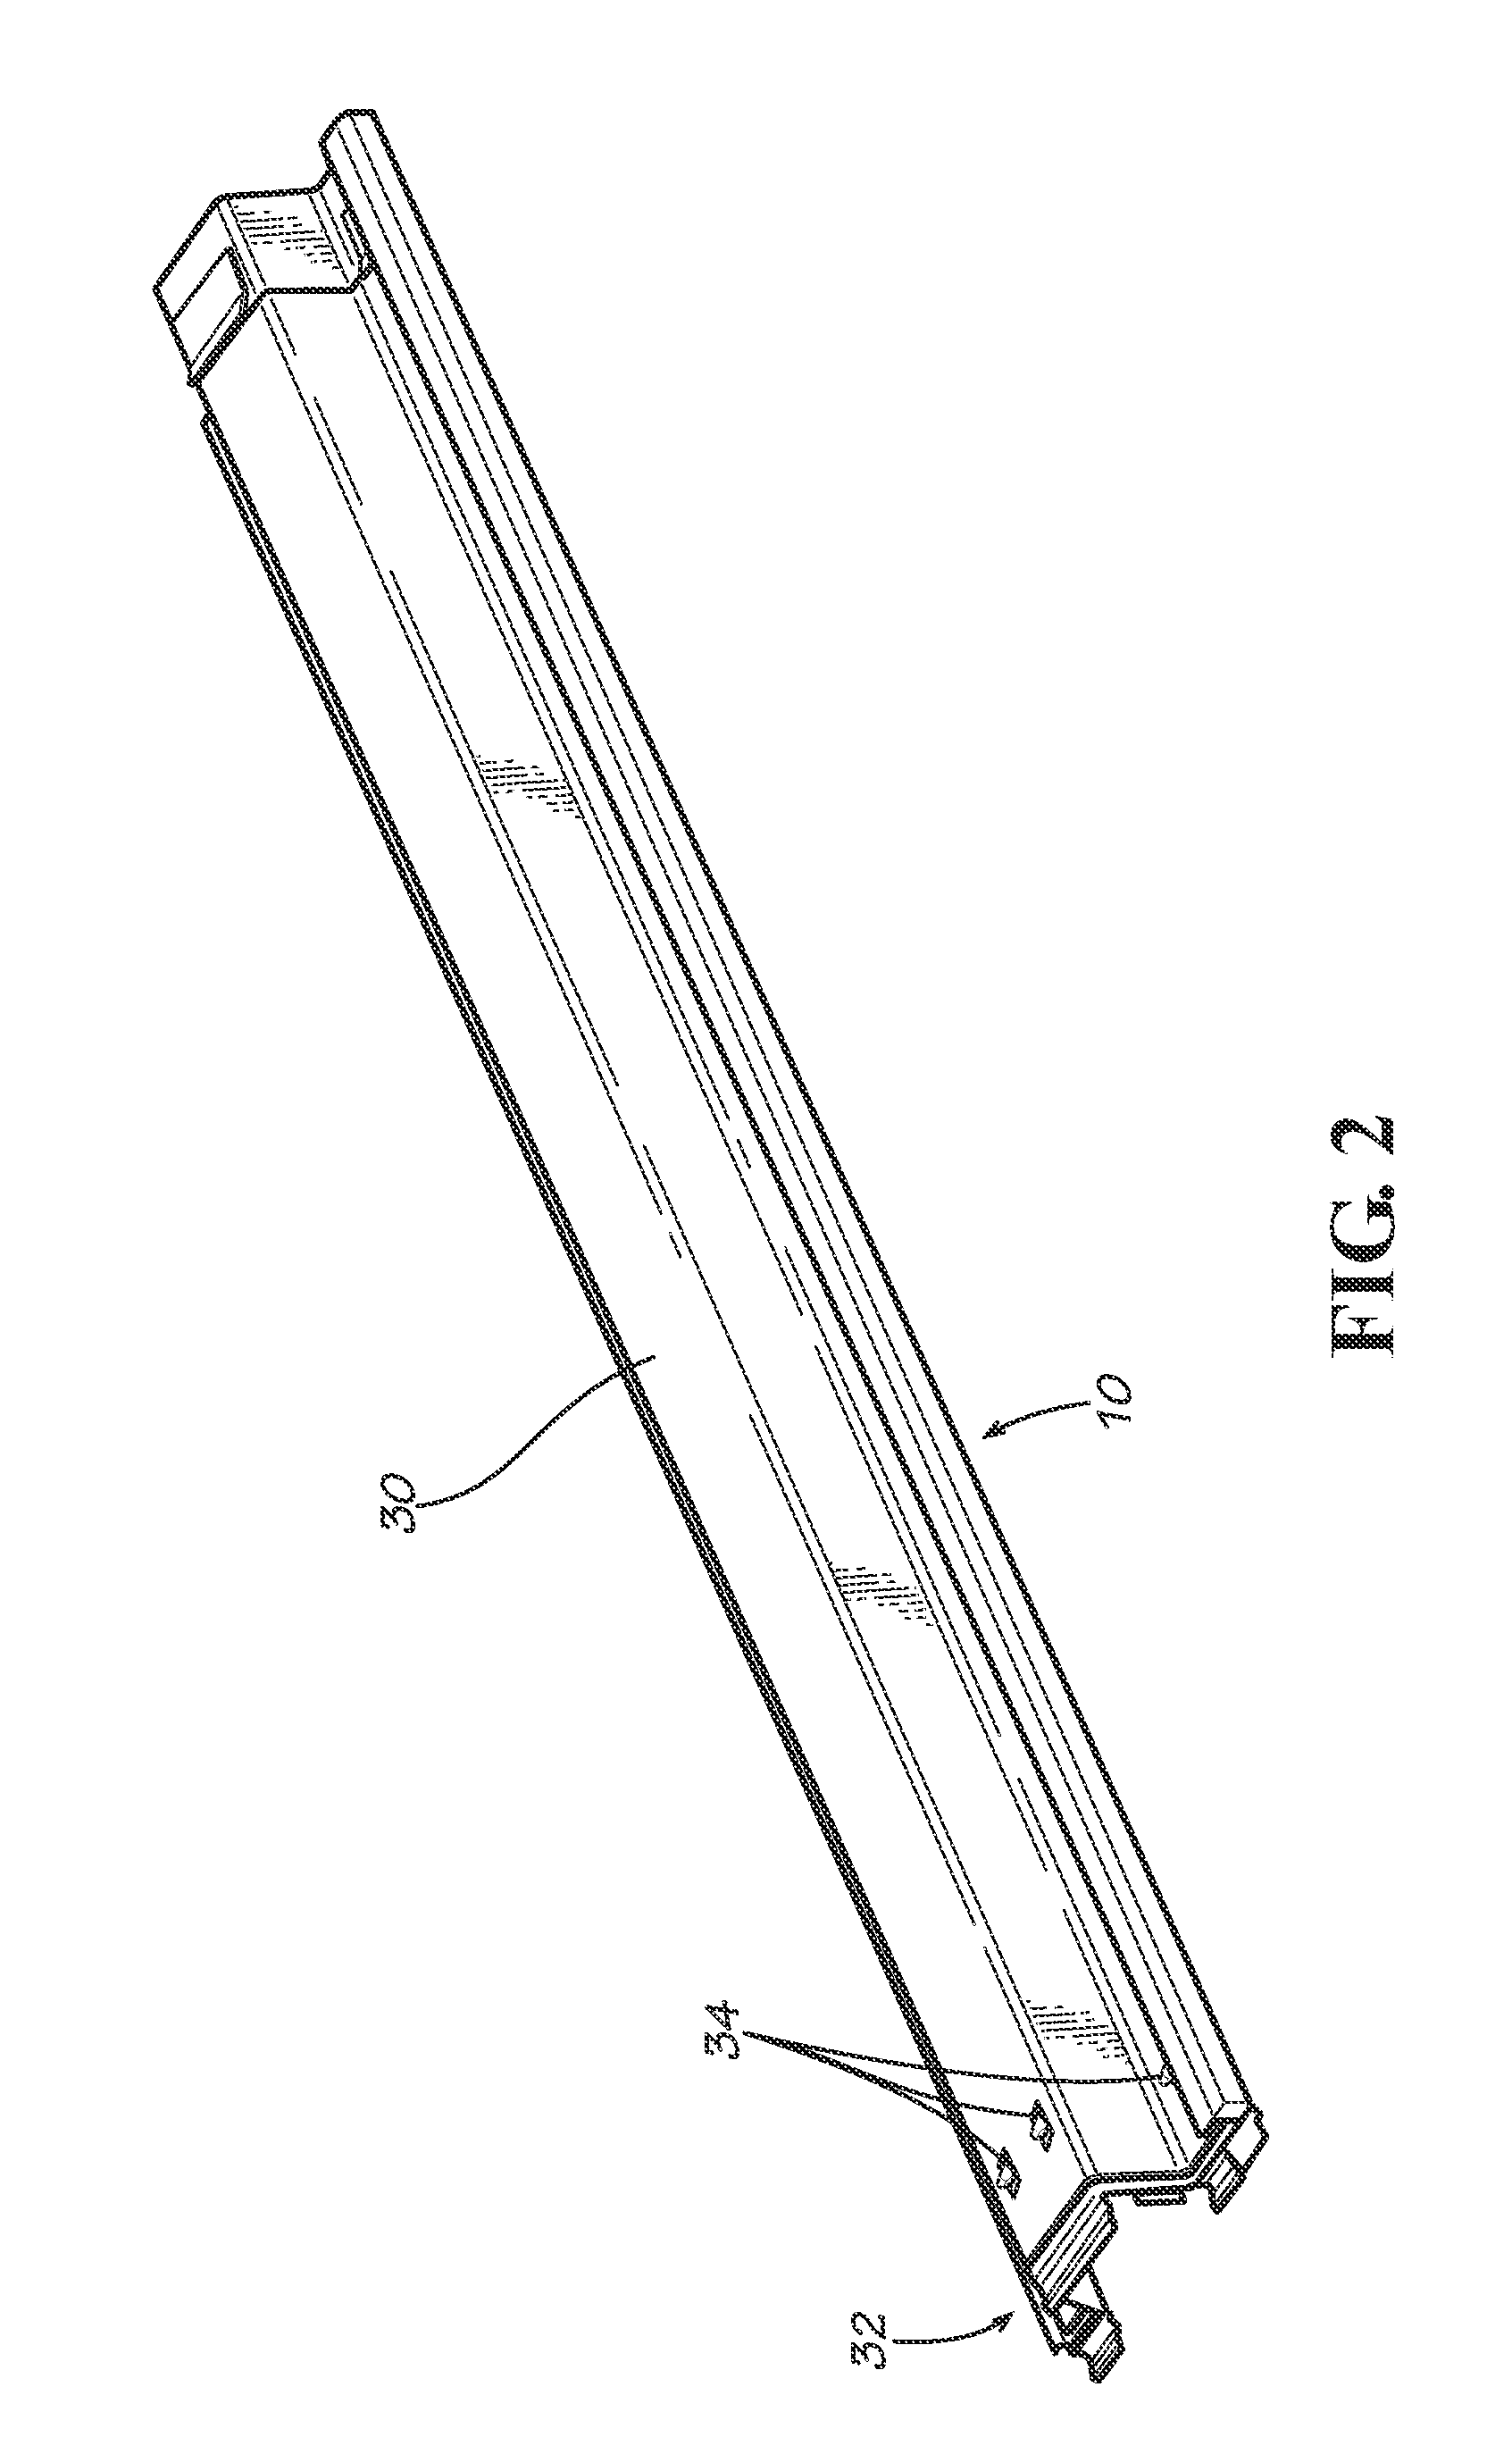 System and method for installing sheet piles